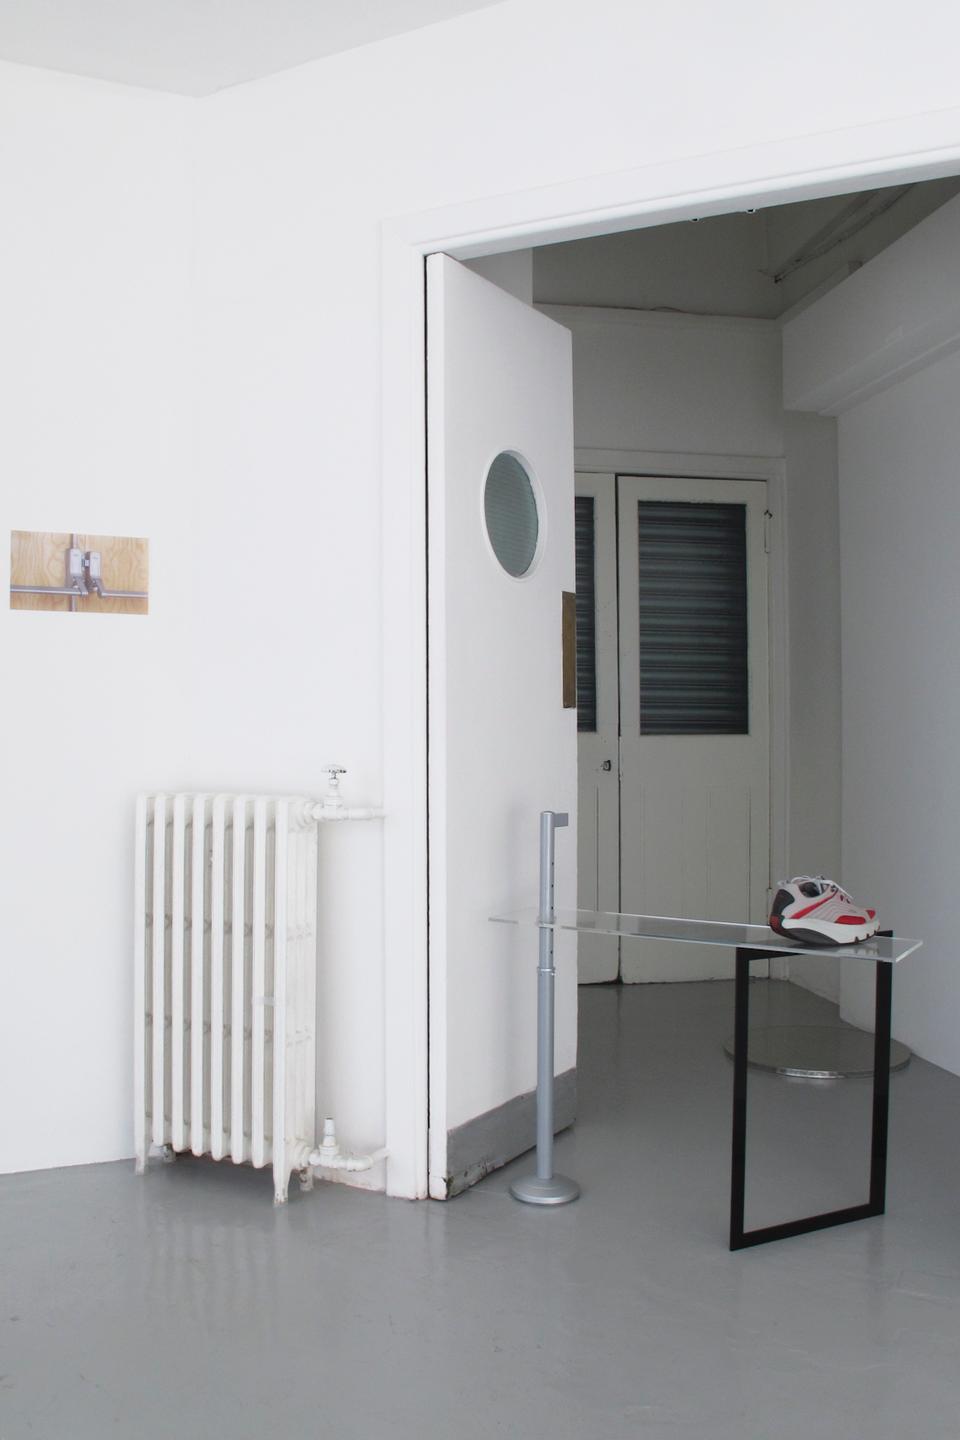 In the foreground, Marte Eknæs <i>Bollard,</i> 2011; behind the wall, <i>Panic Bar,</i> 2011; on the right, <i>Enhancement,</i> 2011.